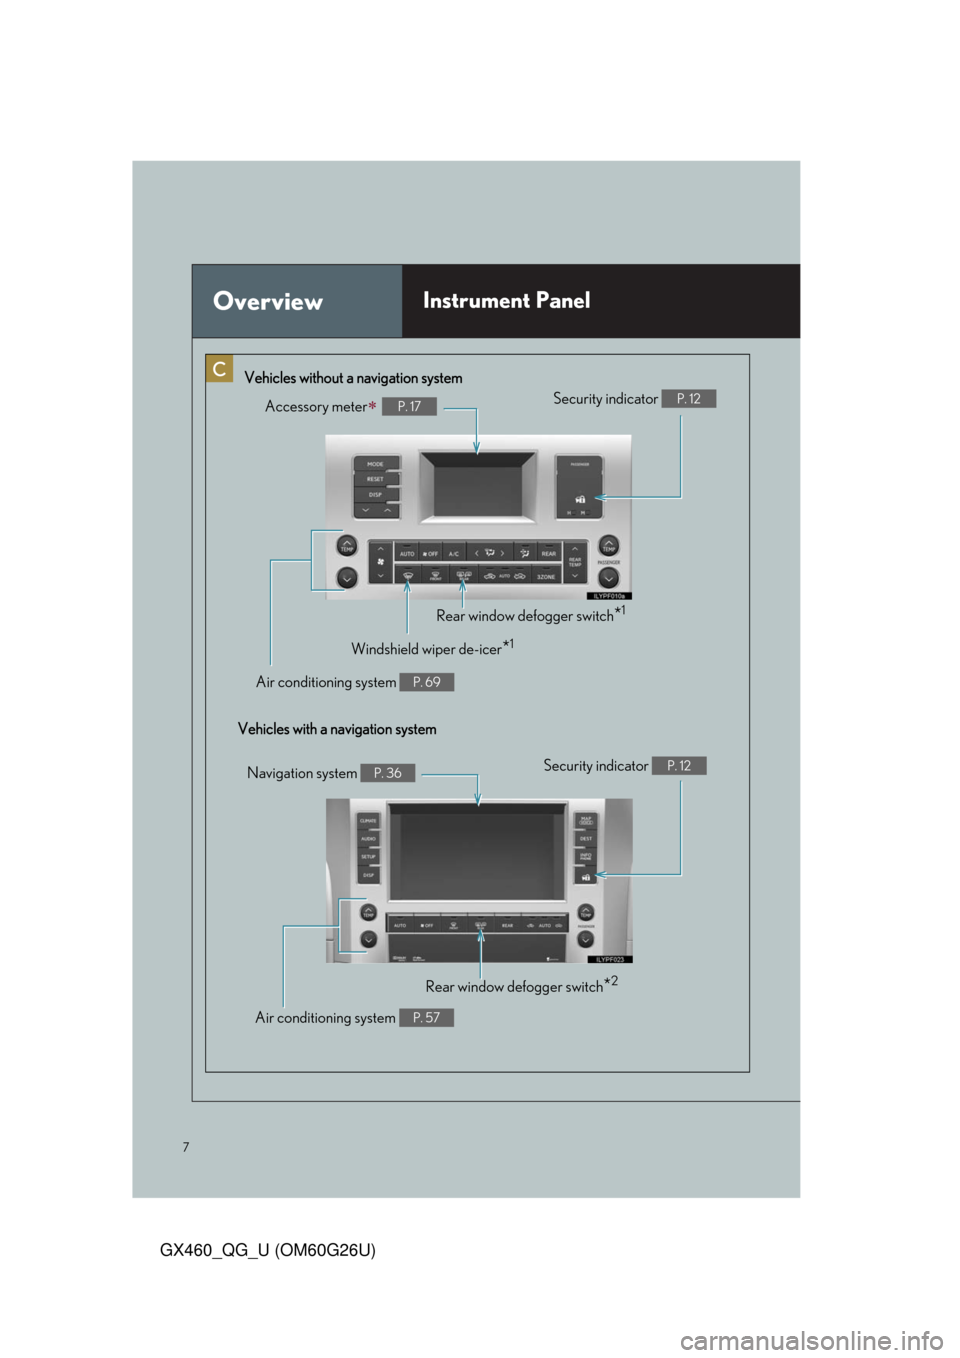 Lexus GX460 2011  Do-It-Yourself Maintenance / LEXUS 2011 GX460 OWNERS MANUAL QUICK GUIDE (OM60G26U) 7
GX460_QG_U (OM60G26U)
OverviewInstrument Panel
Accessory meterP. 17
Vehicles without a navigation system
Vehicles with a navigation systemSecurity indicator 
P. 12
Rear window defogger switch*